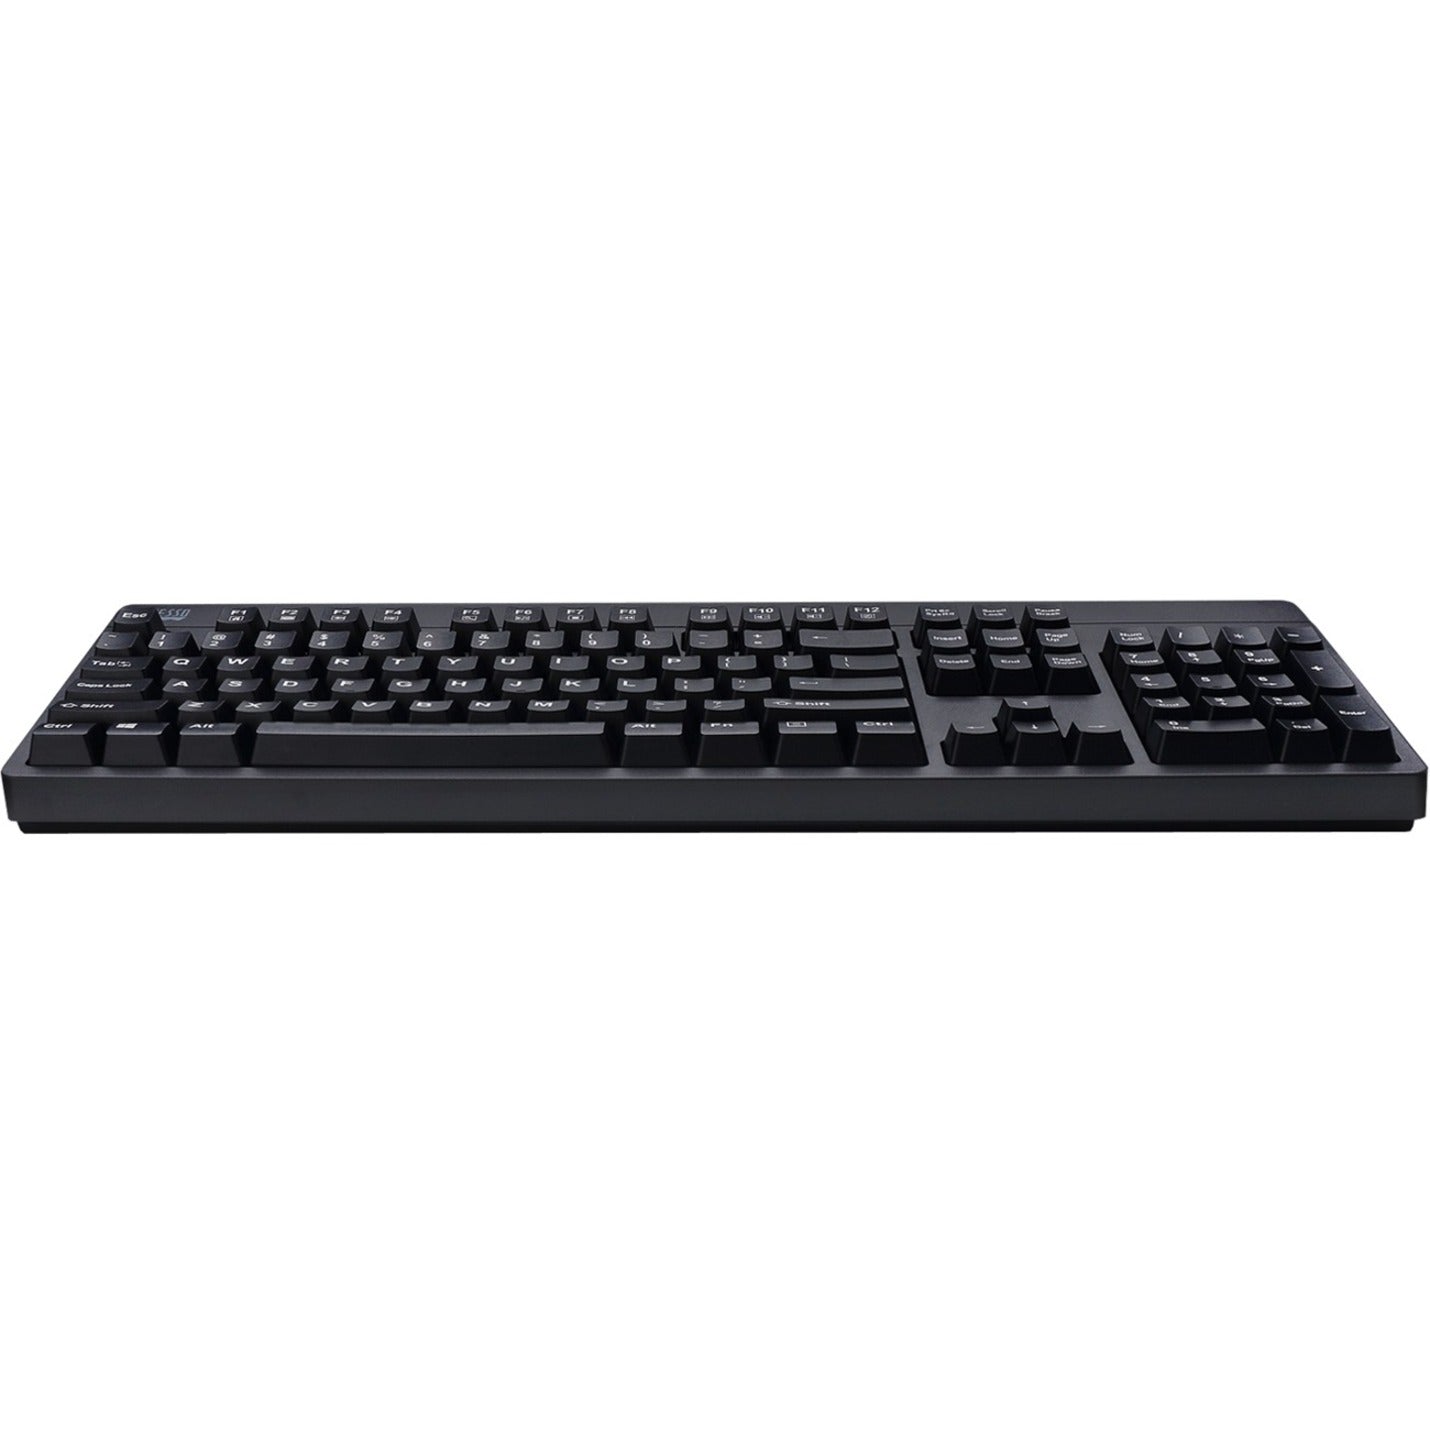 Adesso AKB-630UB EasyTouch 630UB Antimicrobial Waterproof Keyboard, Spill Proof, Full-size, Quiet Keys